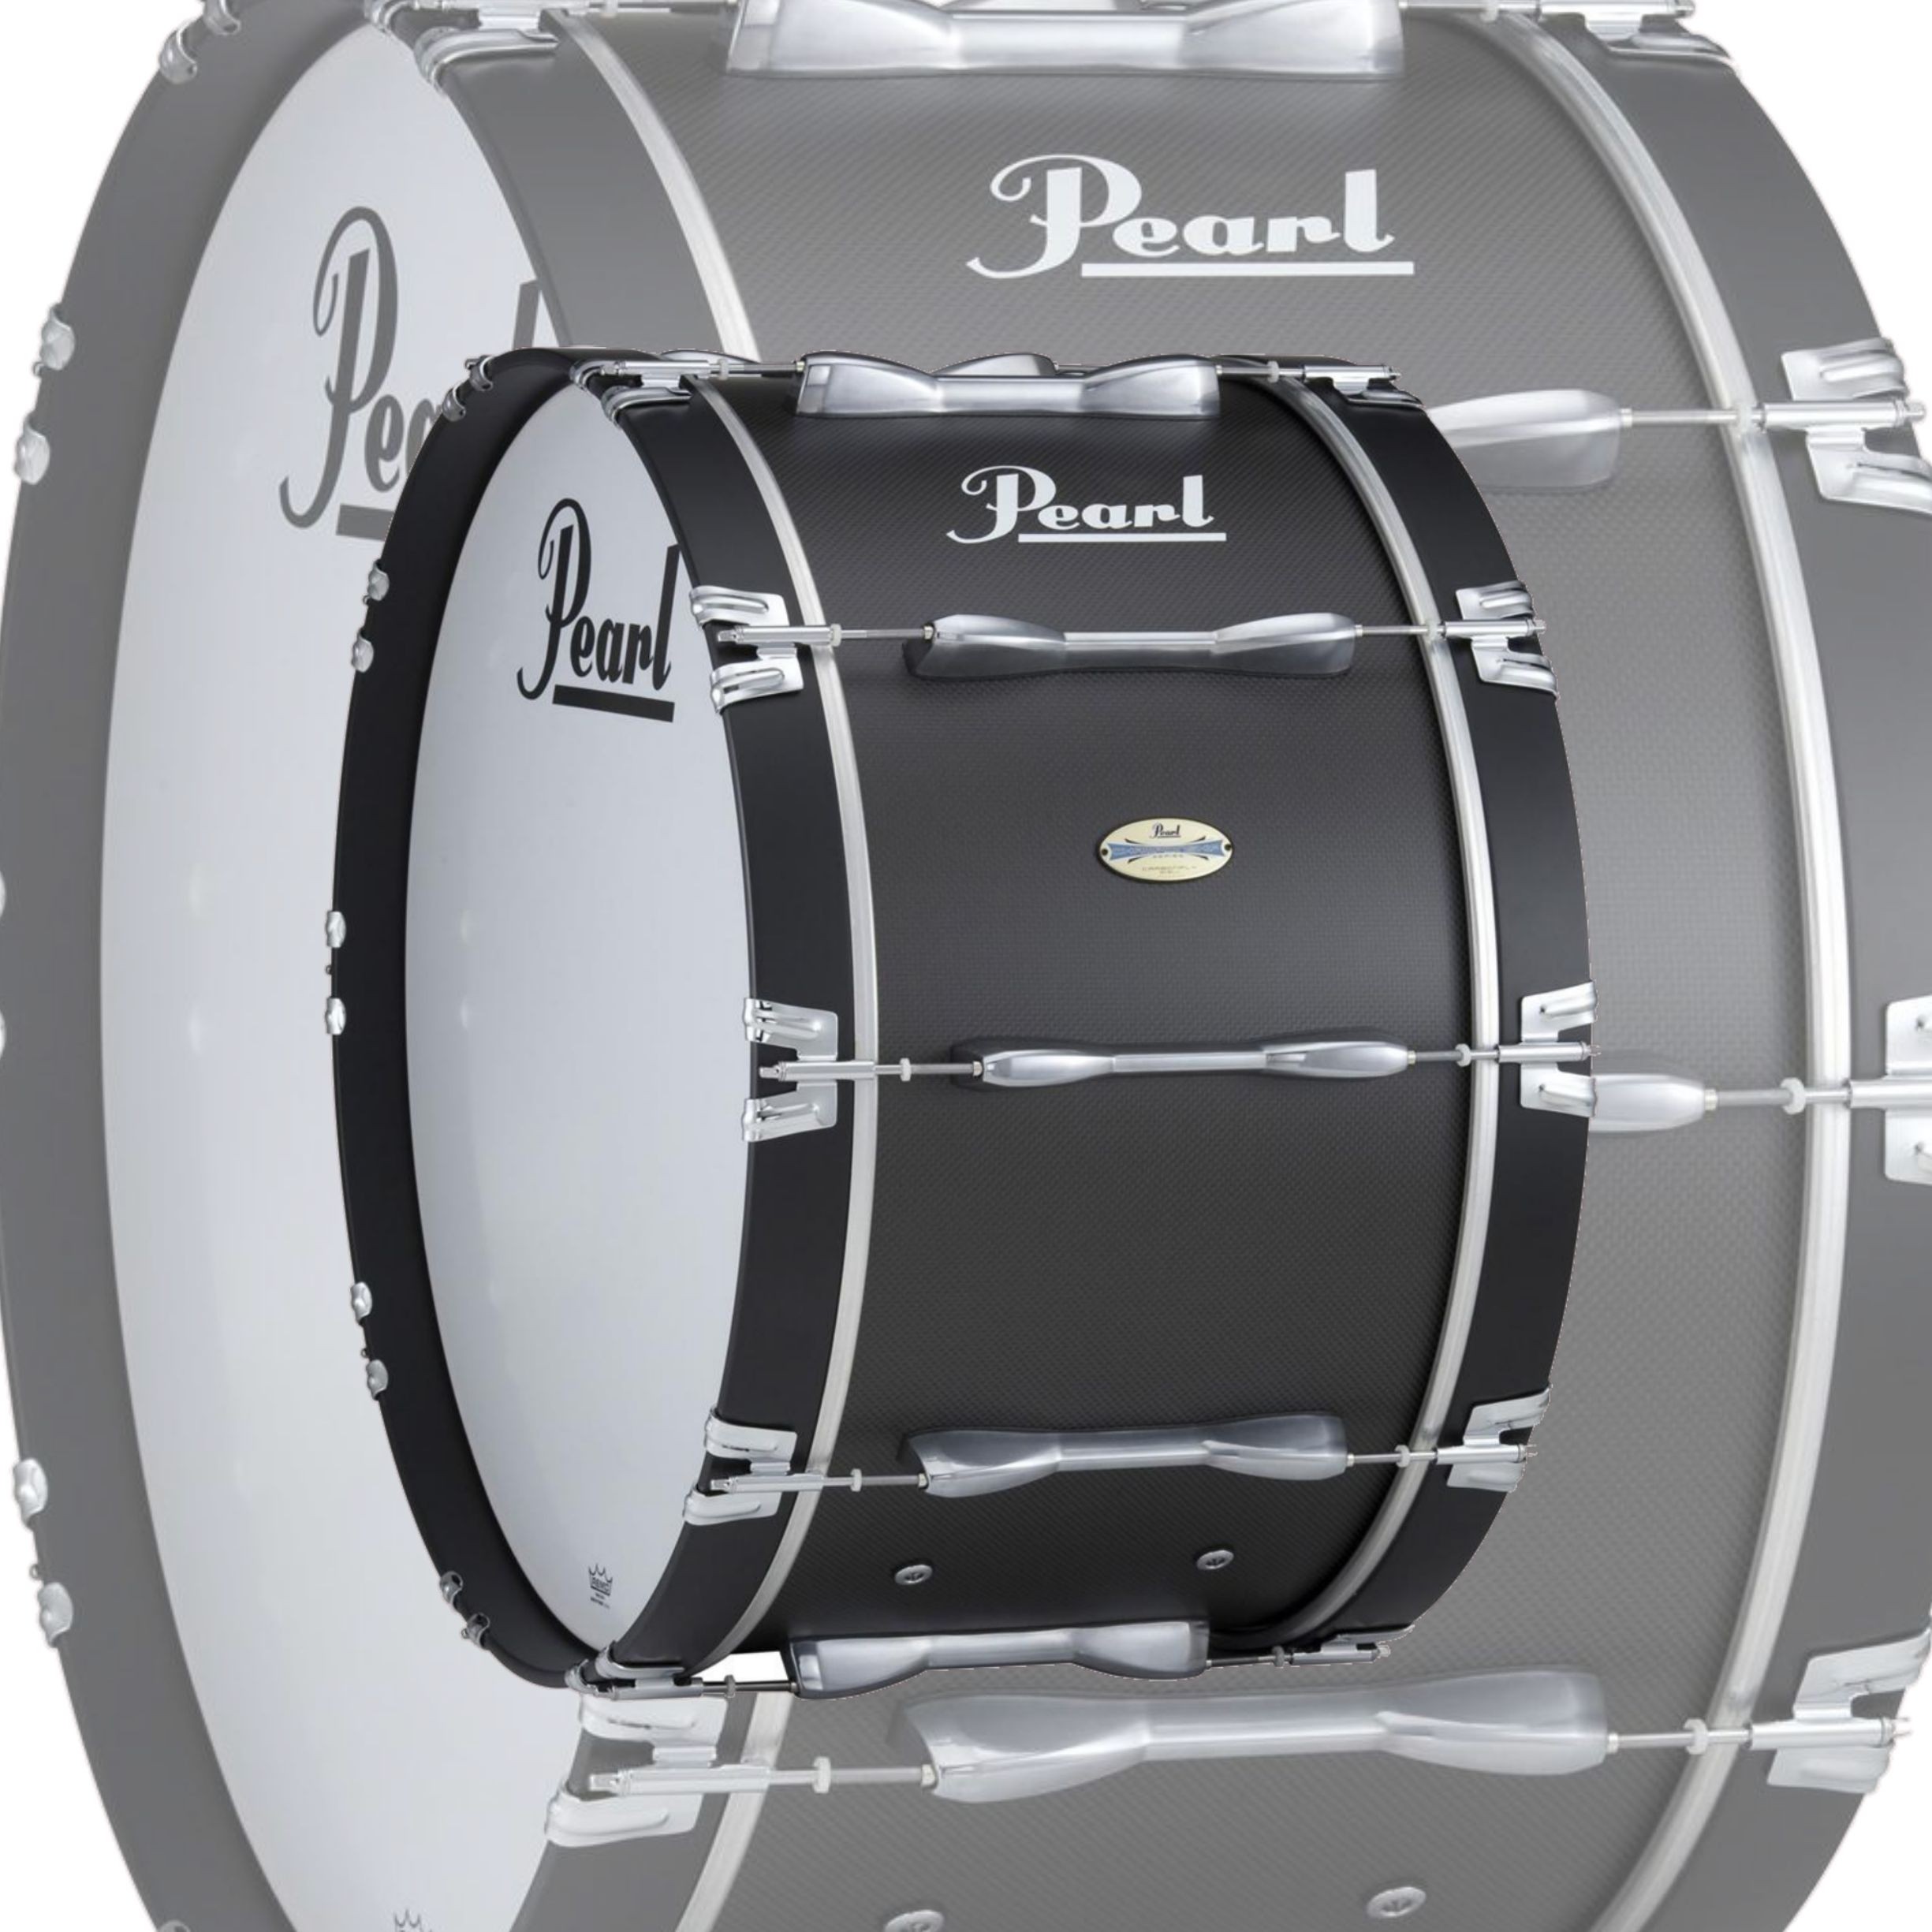 Pearl CarbonPly Championship 22"x14"  Marching Bass Drum